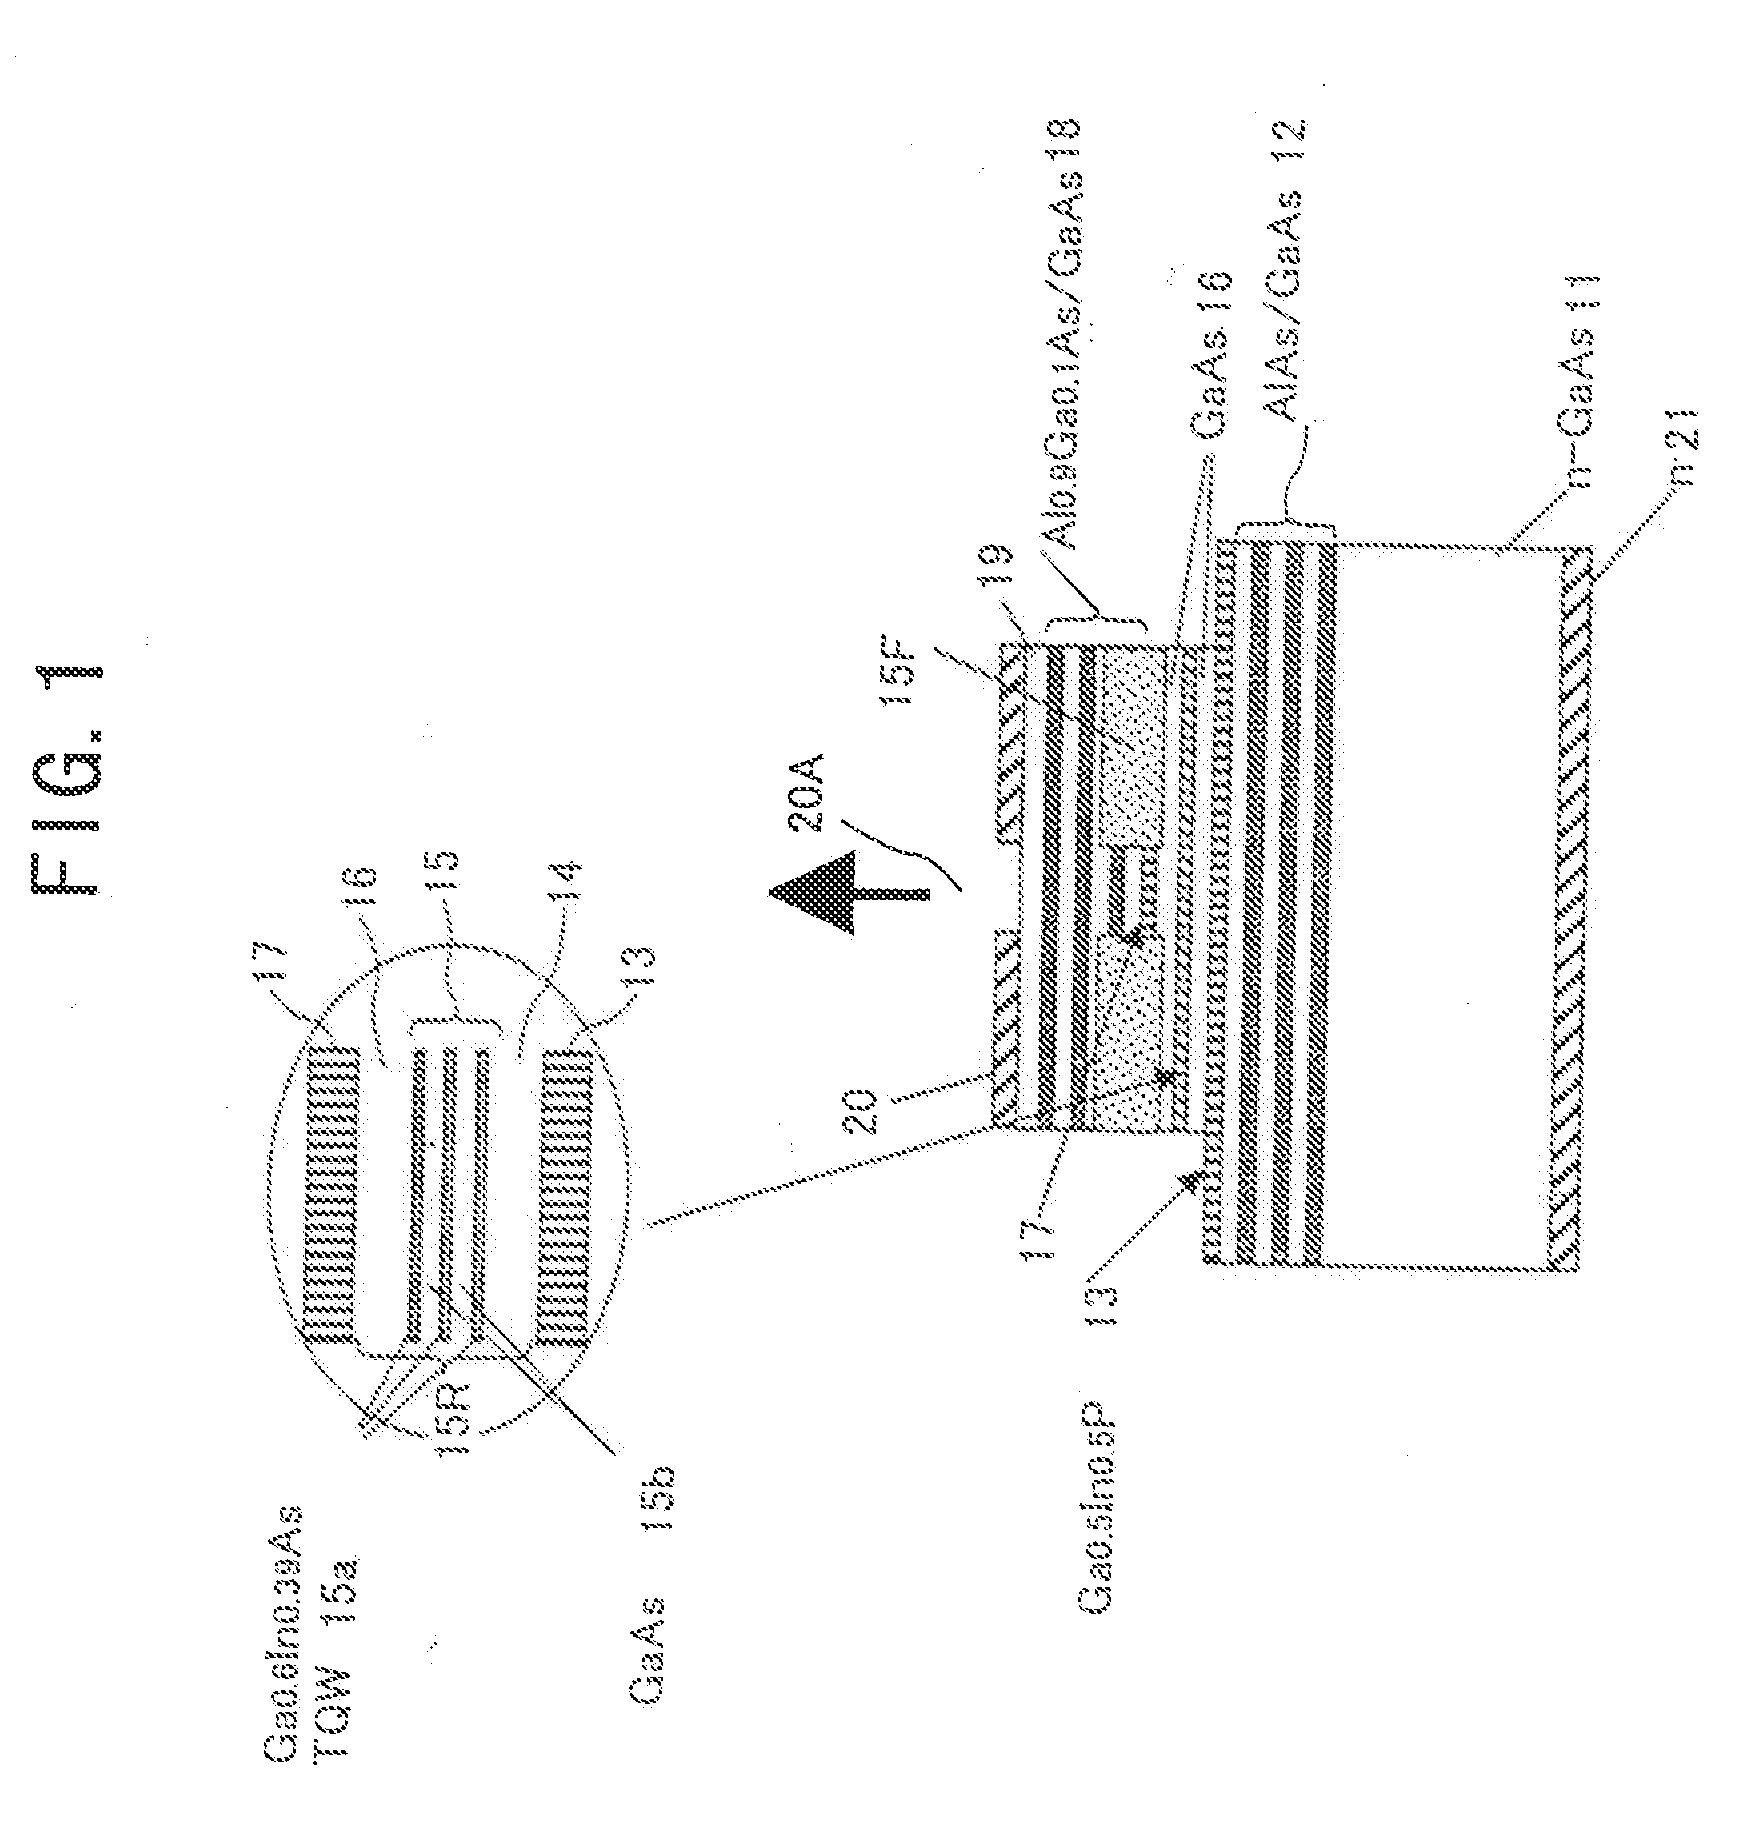 Surface-emission laser diode operable in the wavelength band of 1.1-1.7 micrometers and optical telecommunication system using such a laser diode